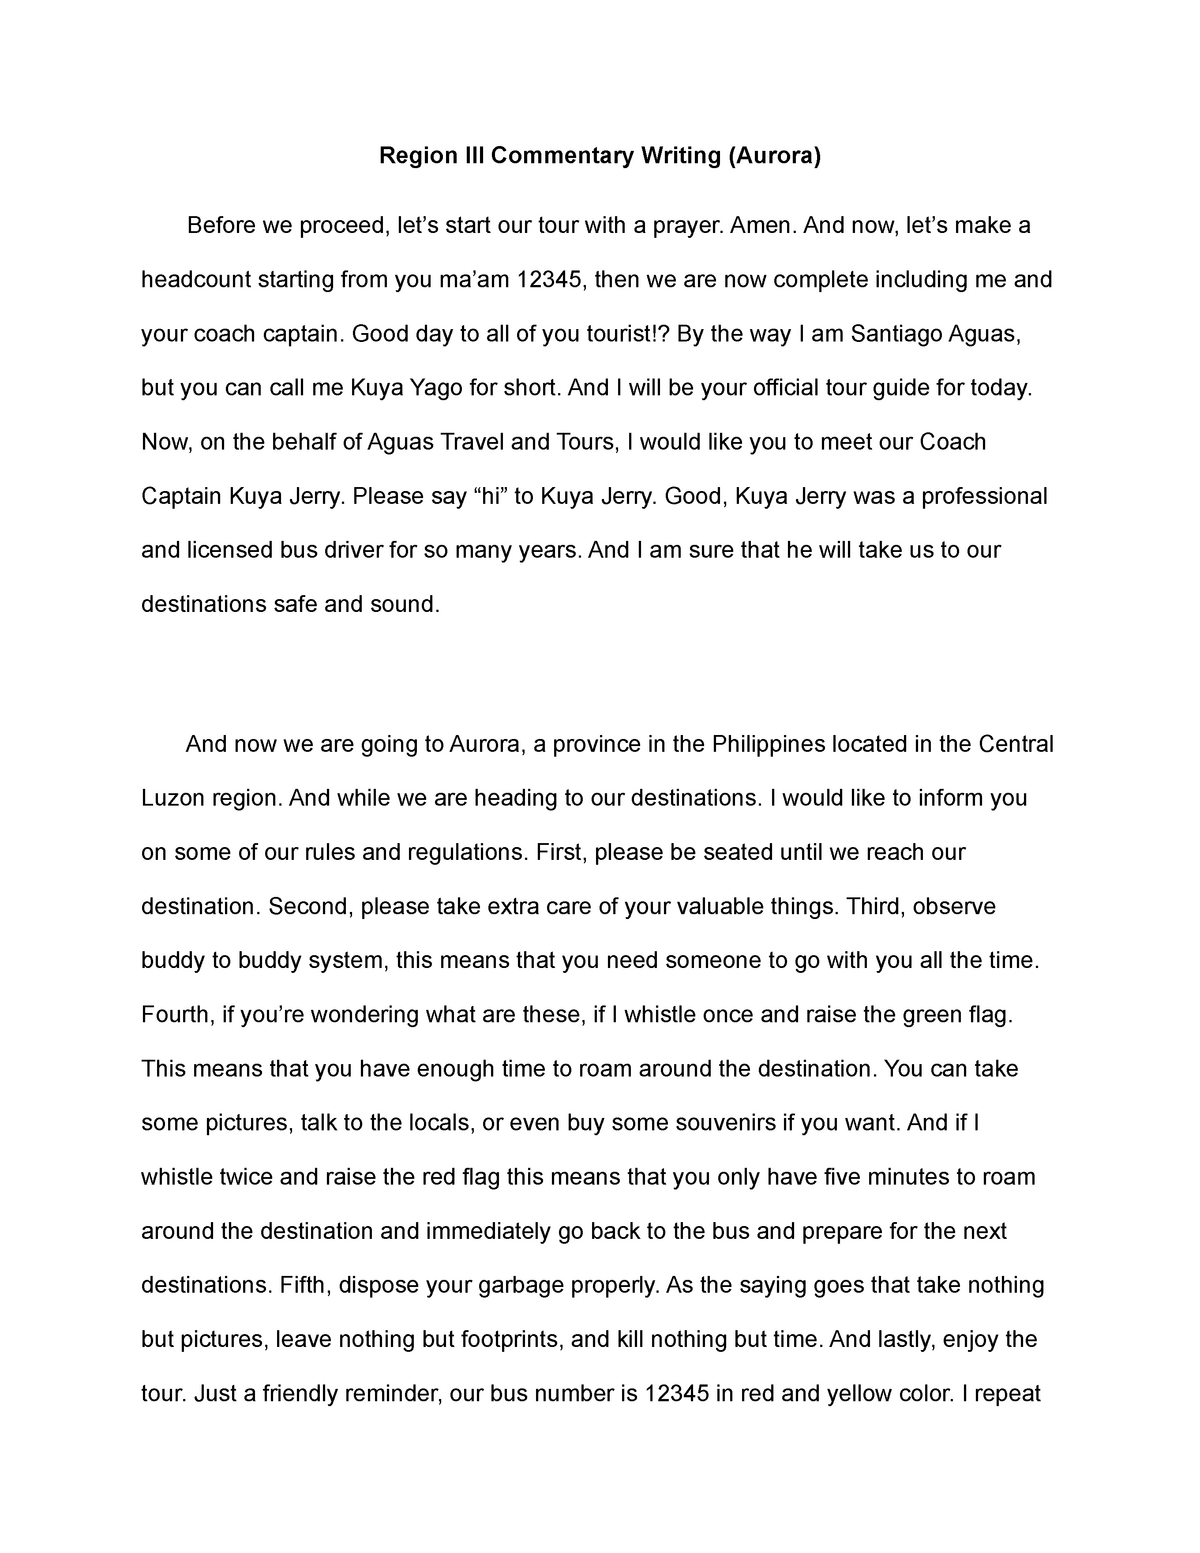 essay about guide tour